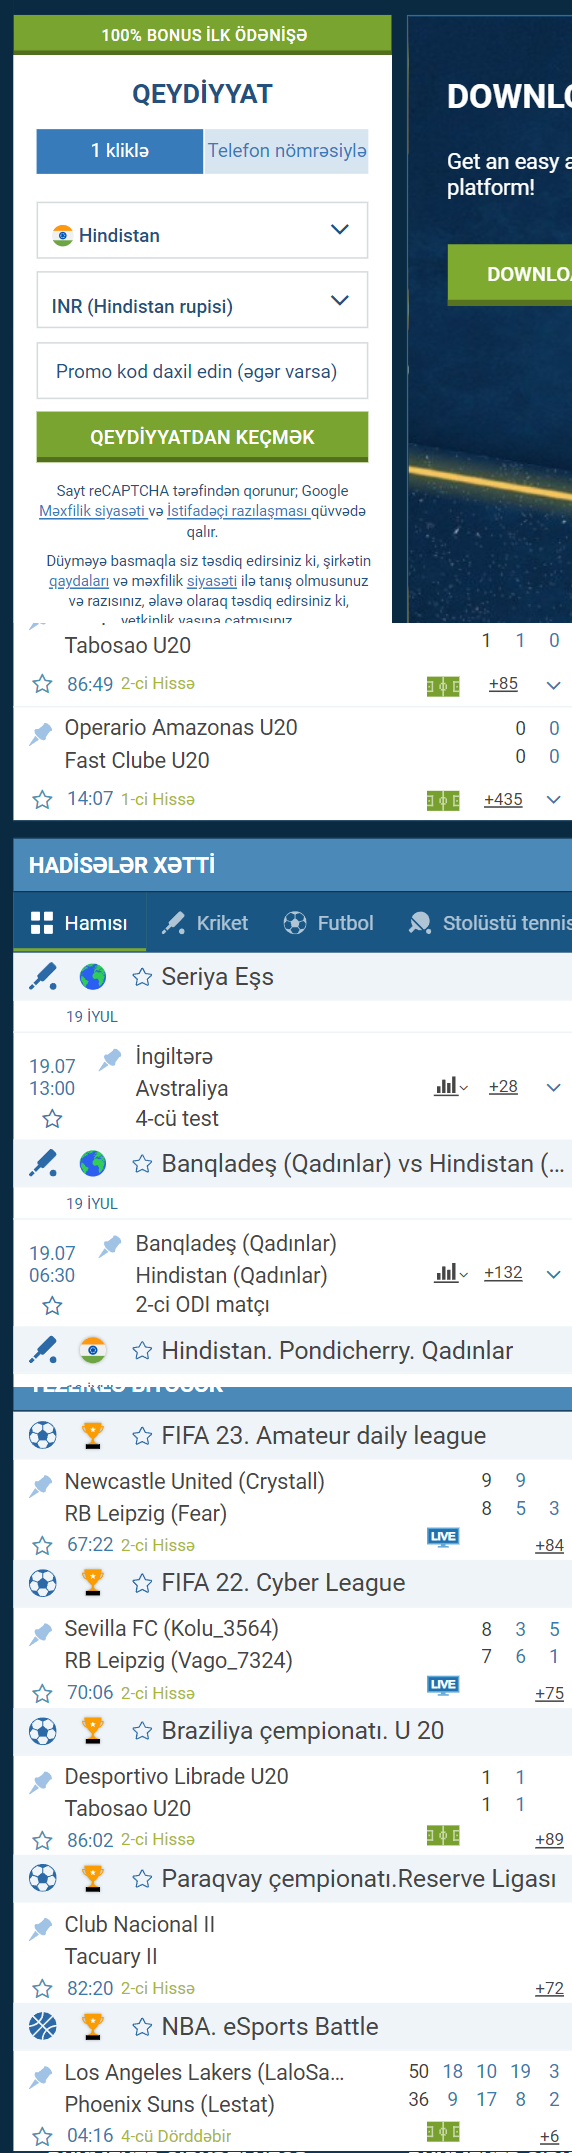 1xBet-online-sports-betting-in-India